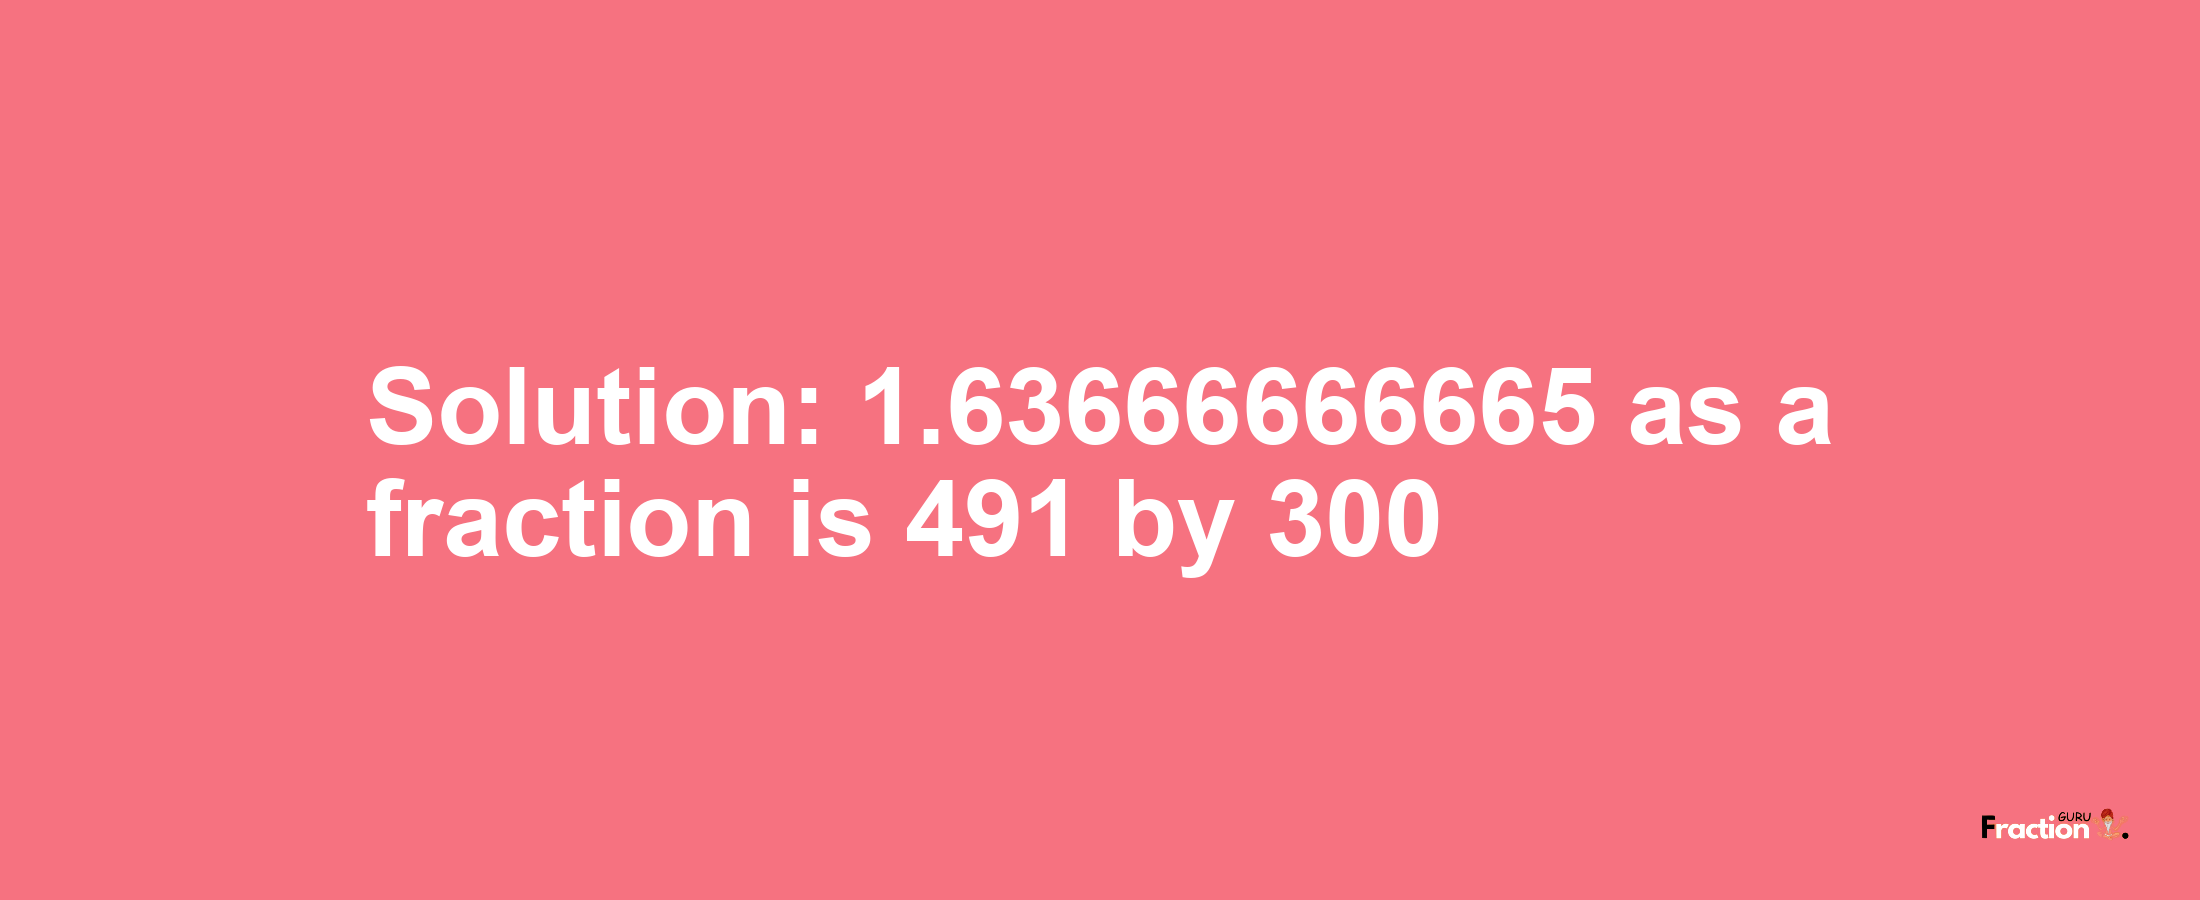 Solution:1.63666666665 as a fraction is 491/300